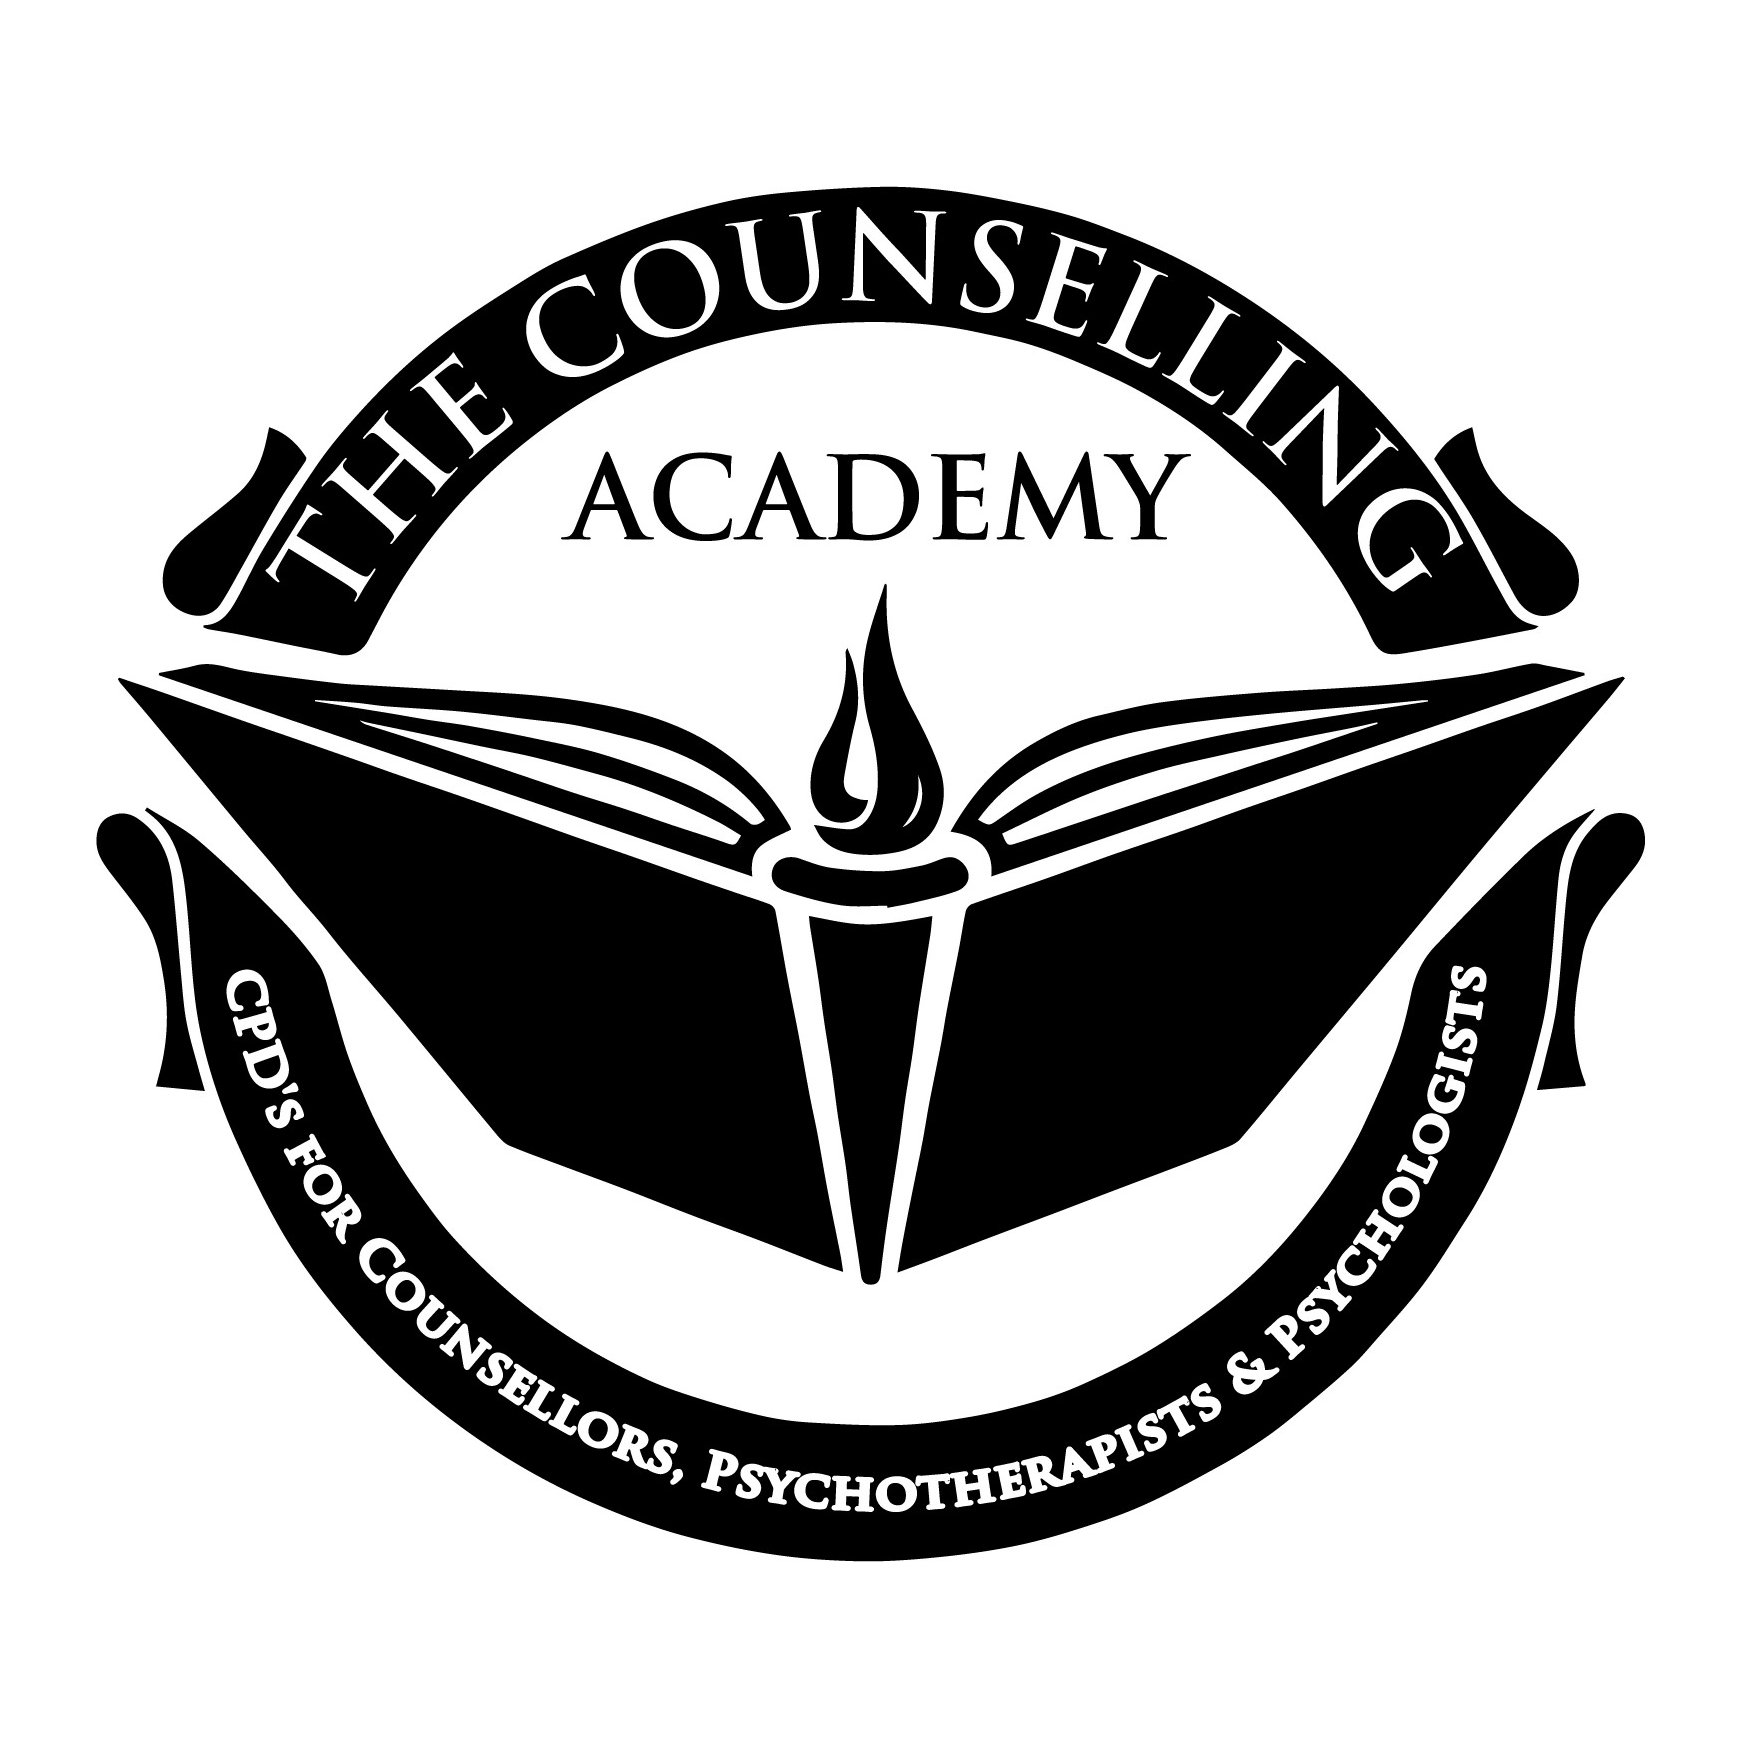 Qualified professional Counsellors, Psychotherapists and Psychologists providing online CPD courses.